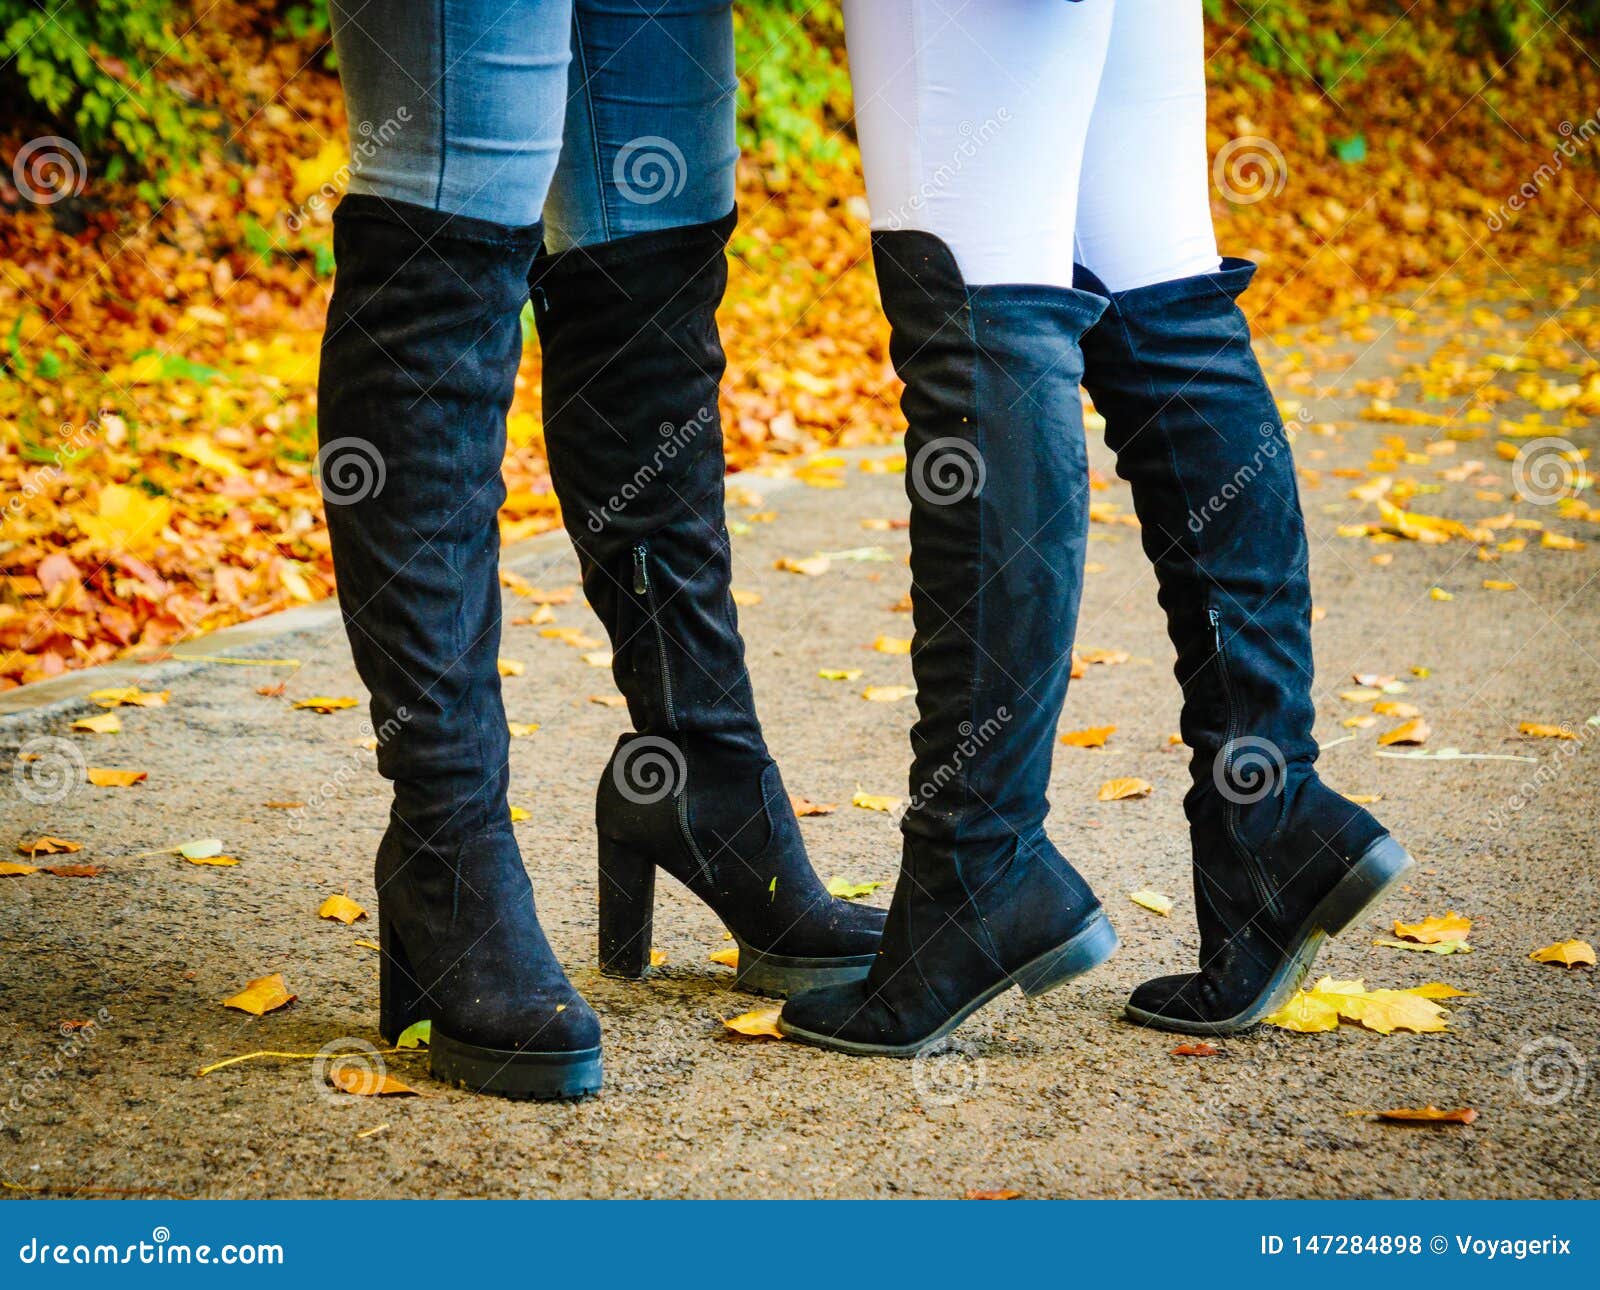 Two Women Wearing Black Knee High Boots Stock Photo - Image of boots ...